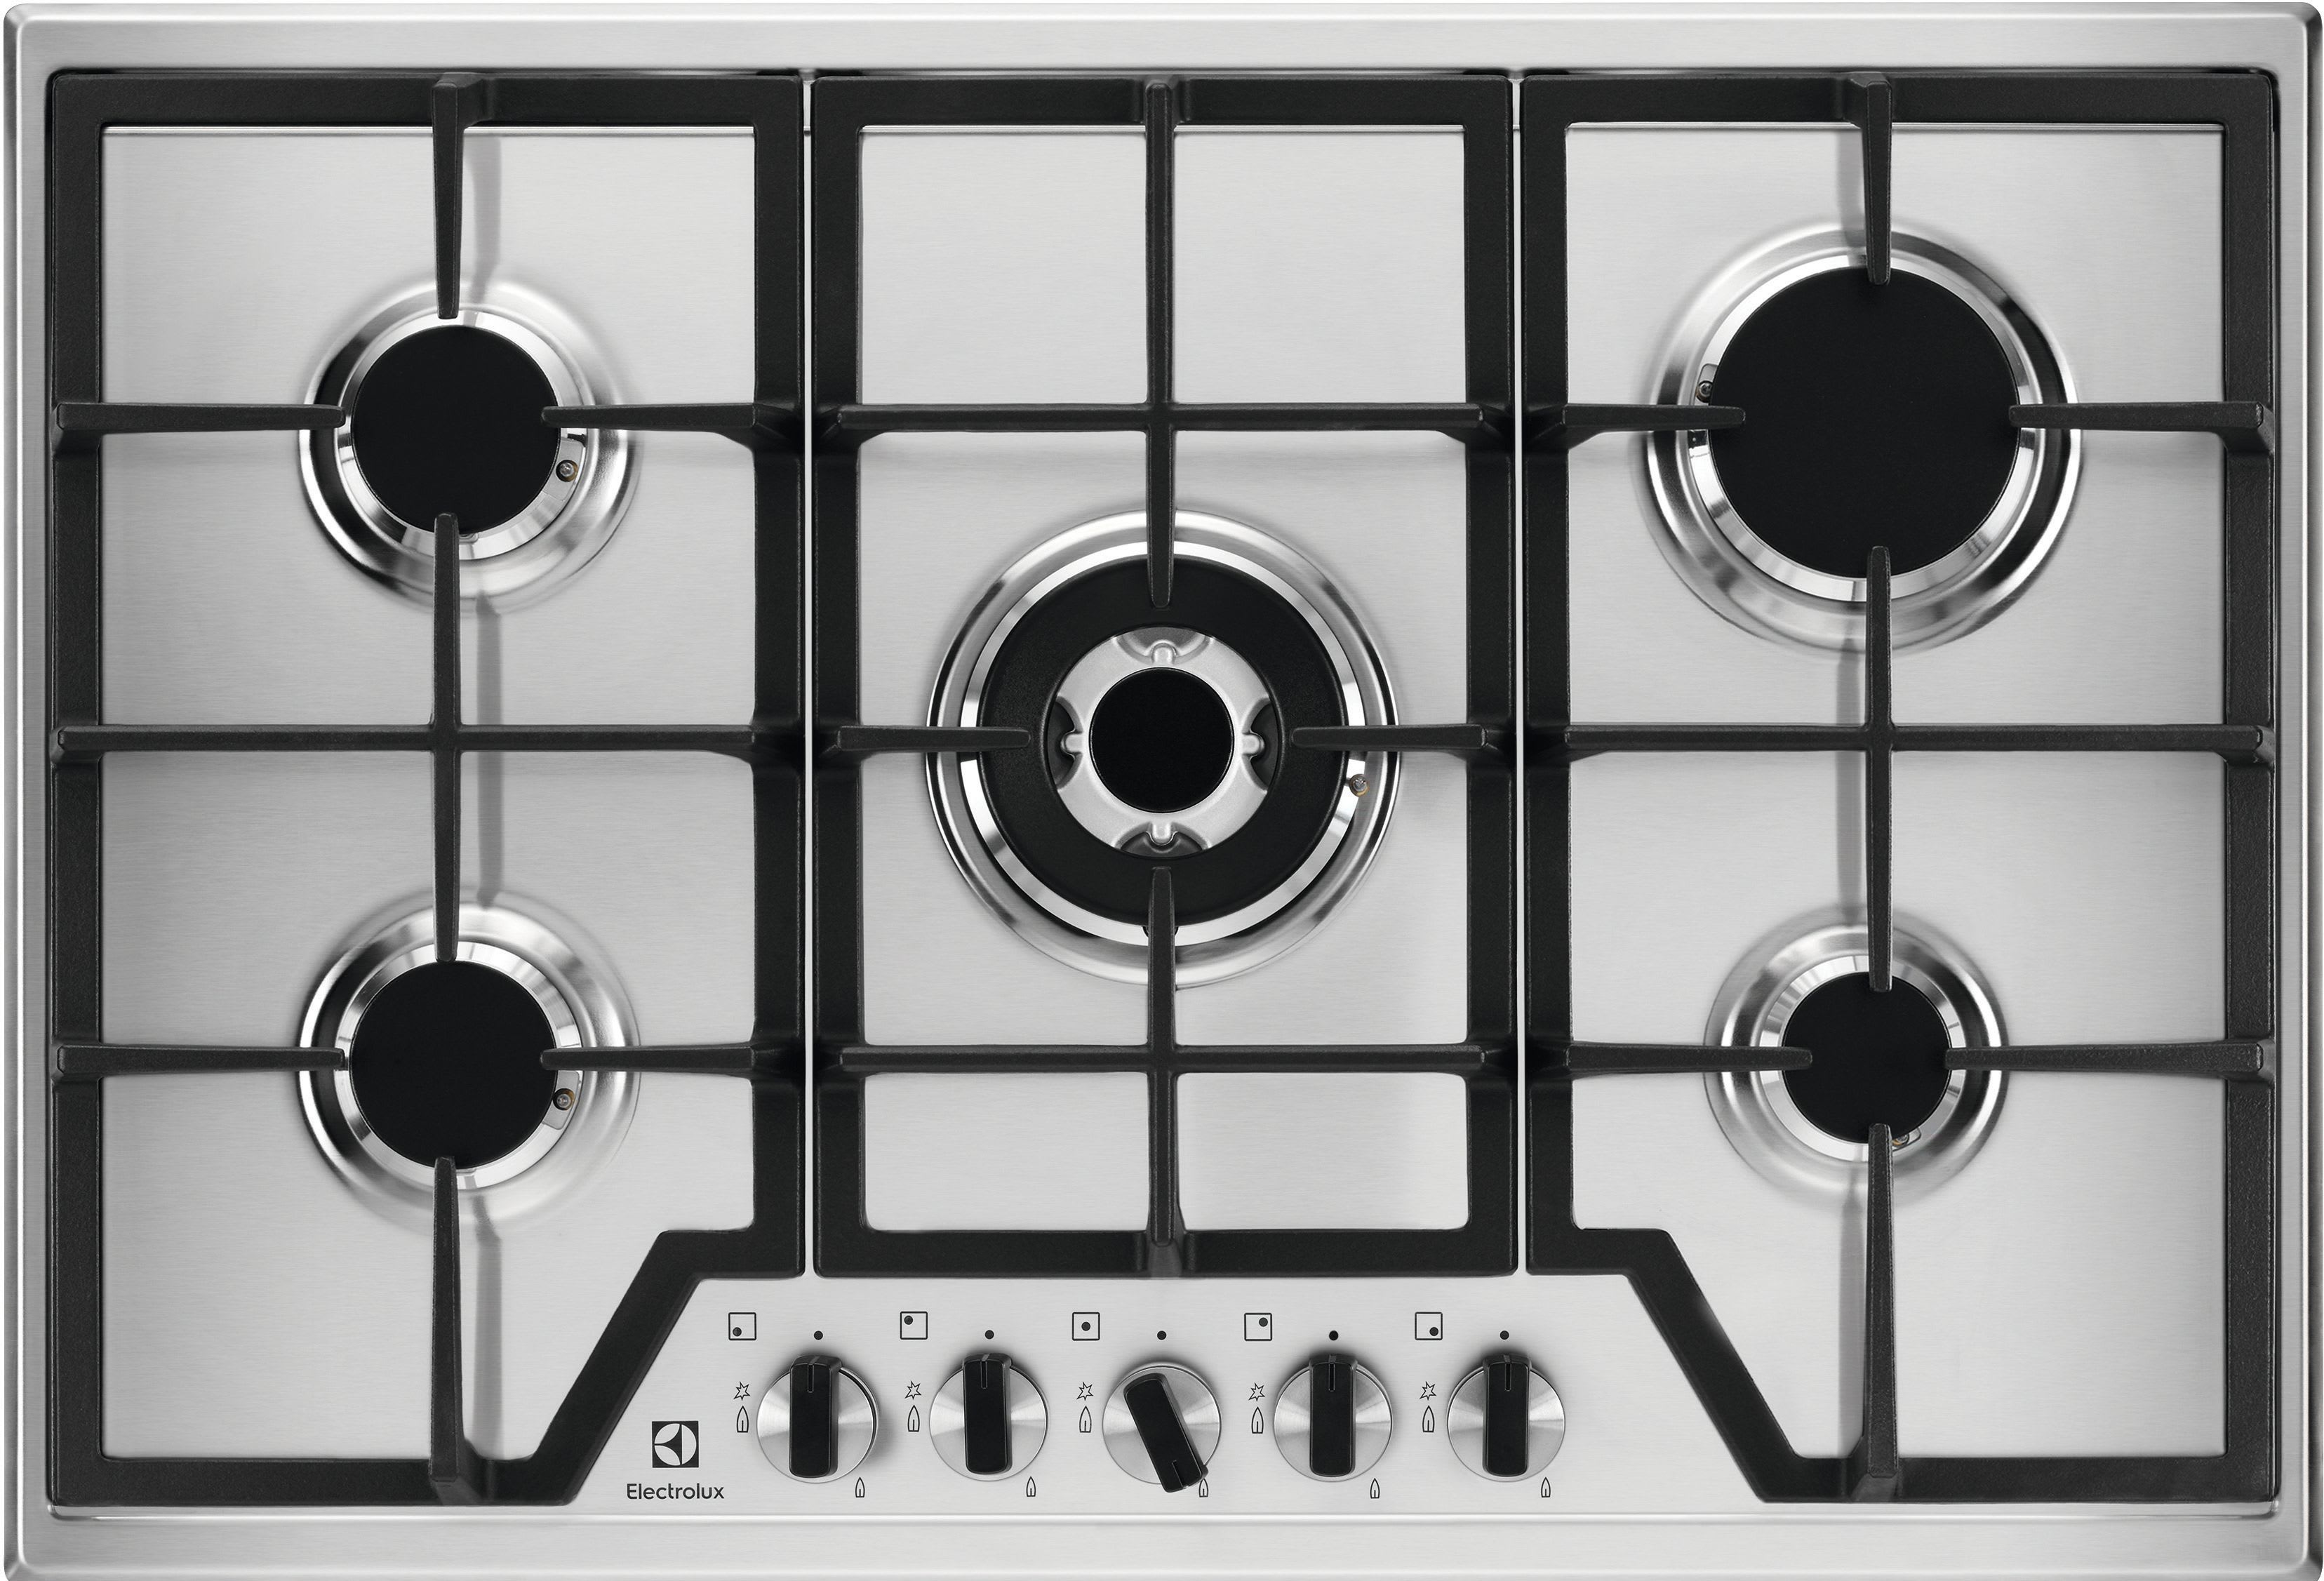 Electrolux KGS7536X 5 Burner Stainless Steel Gas Hob